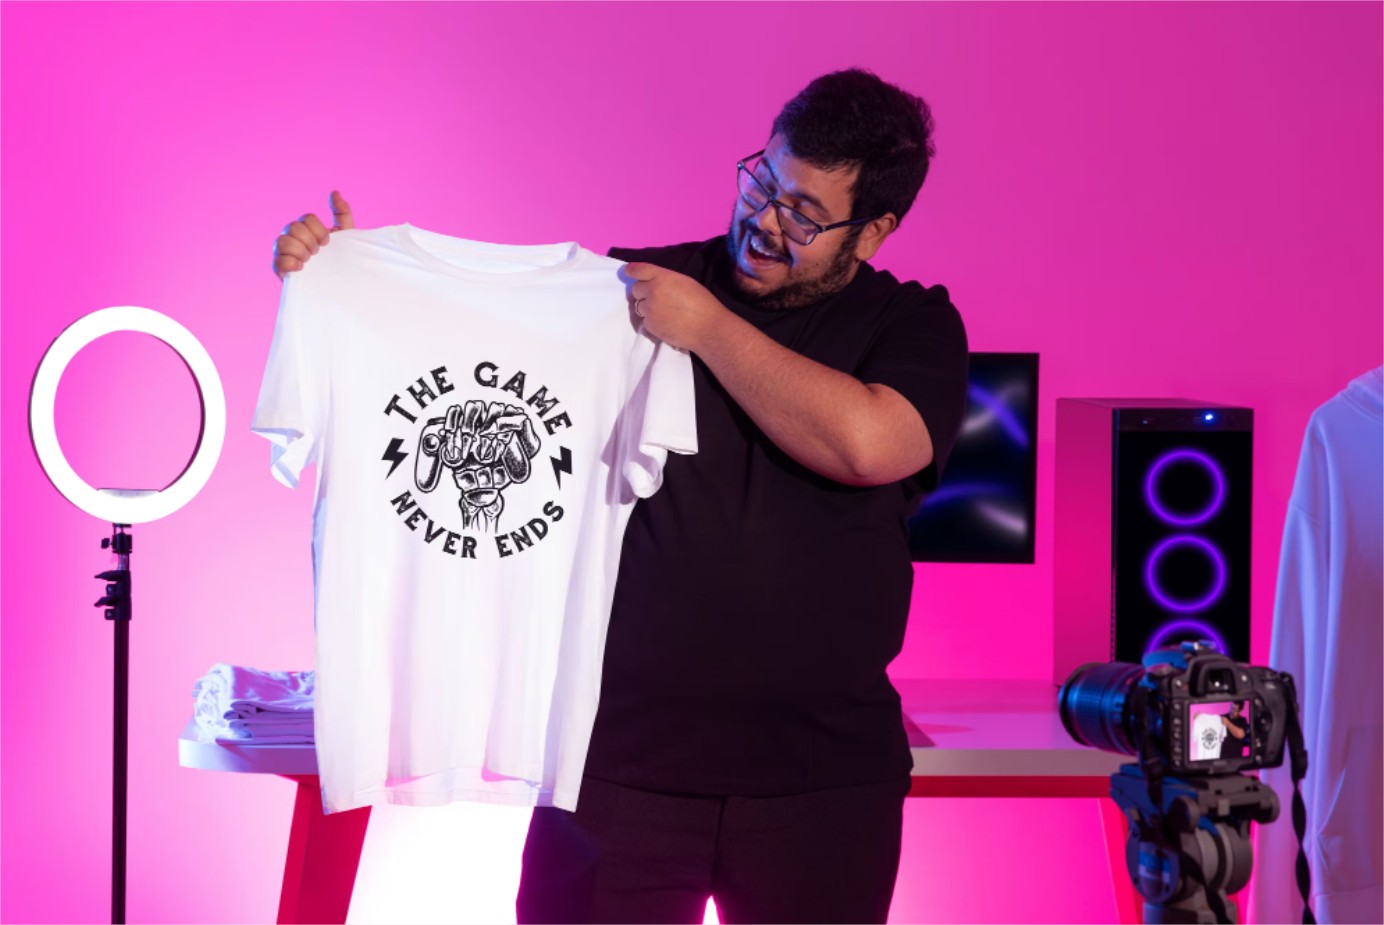 Gamer content creator with merch